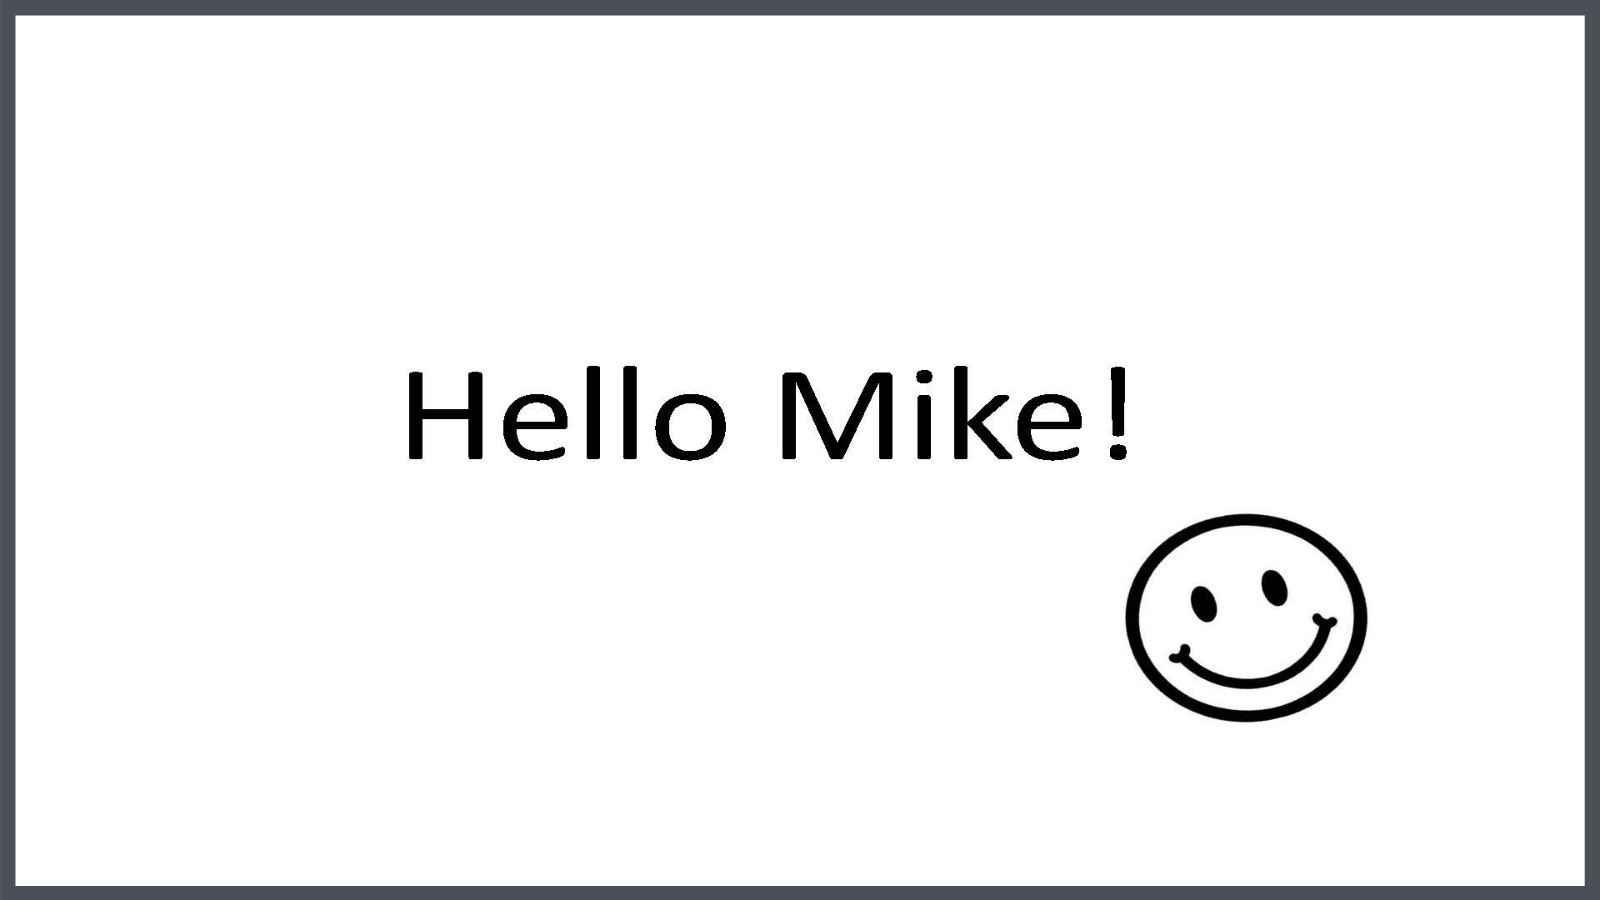 The words "Hello Mike!" with a smiley face